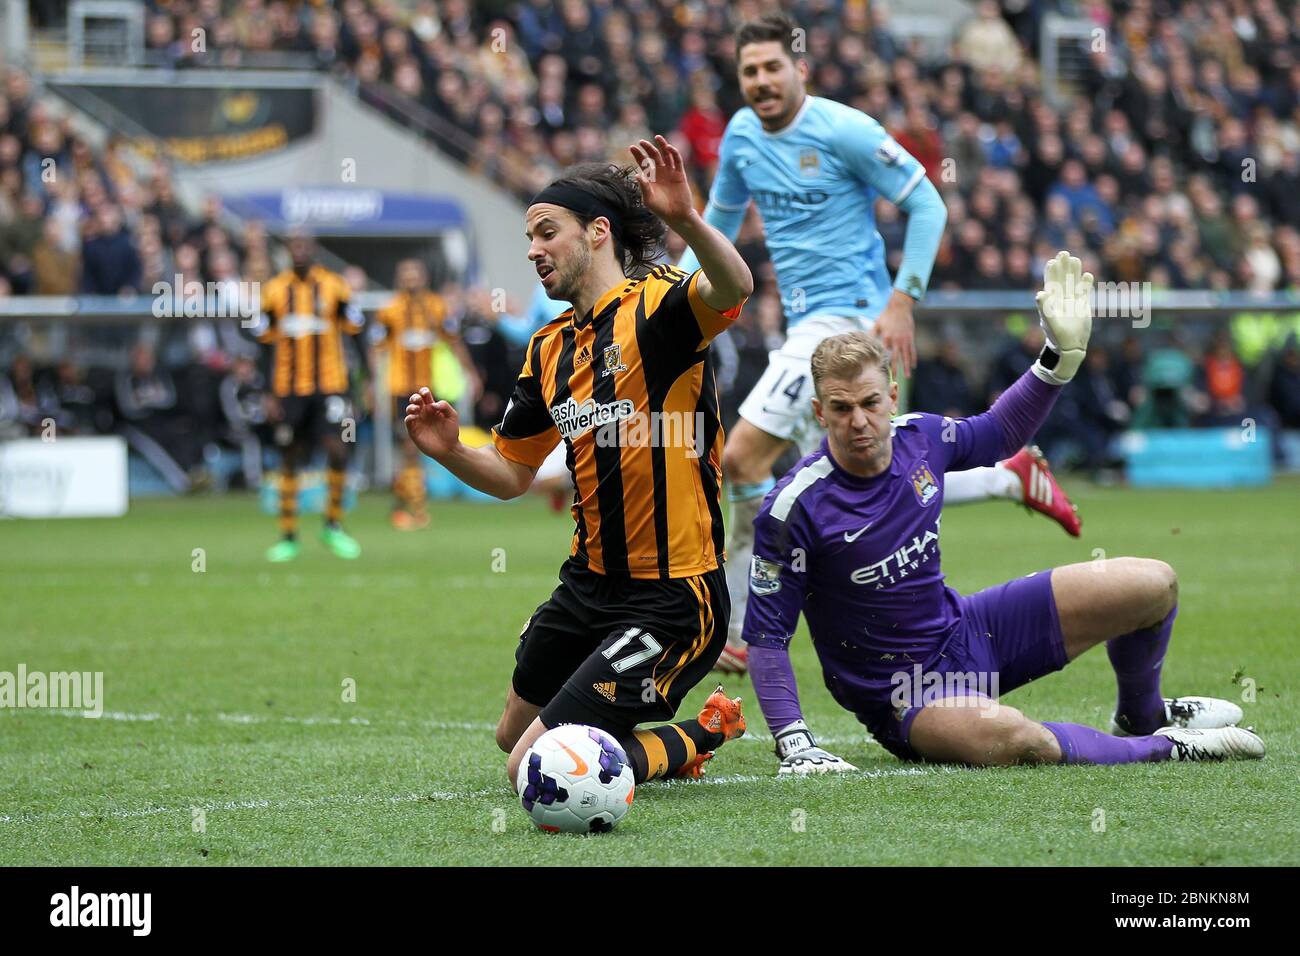 KINGSTON UPON HULL, ENGLAND - George Boyd of Hull City goes down in the penalty area after a Joe Hart challenge during the Premier League match between Hull City and Manchester City at the KC Stadium, Kingston upon Hull on Saturday 15th March 2014 (Credit: Mark Fletcher | MI News) Stock Photo